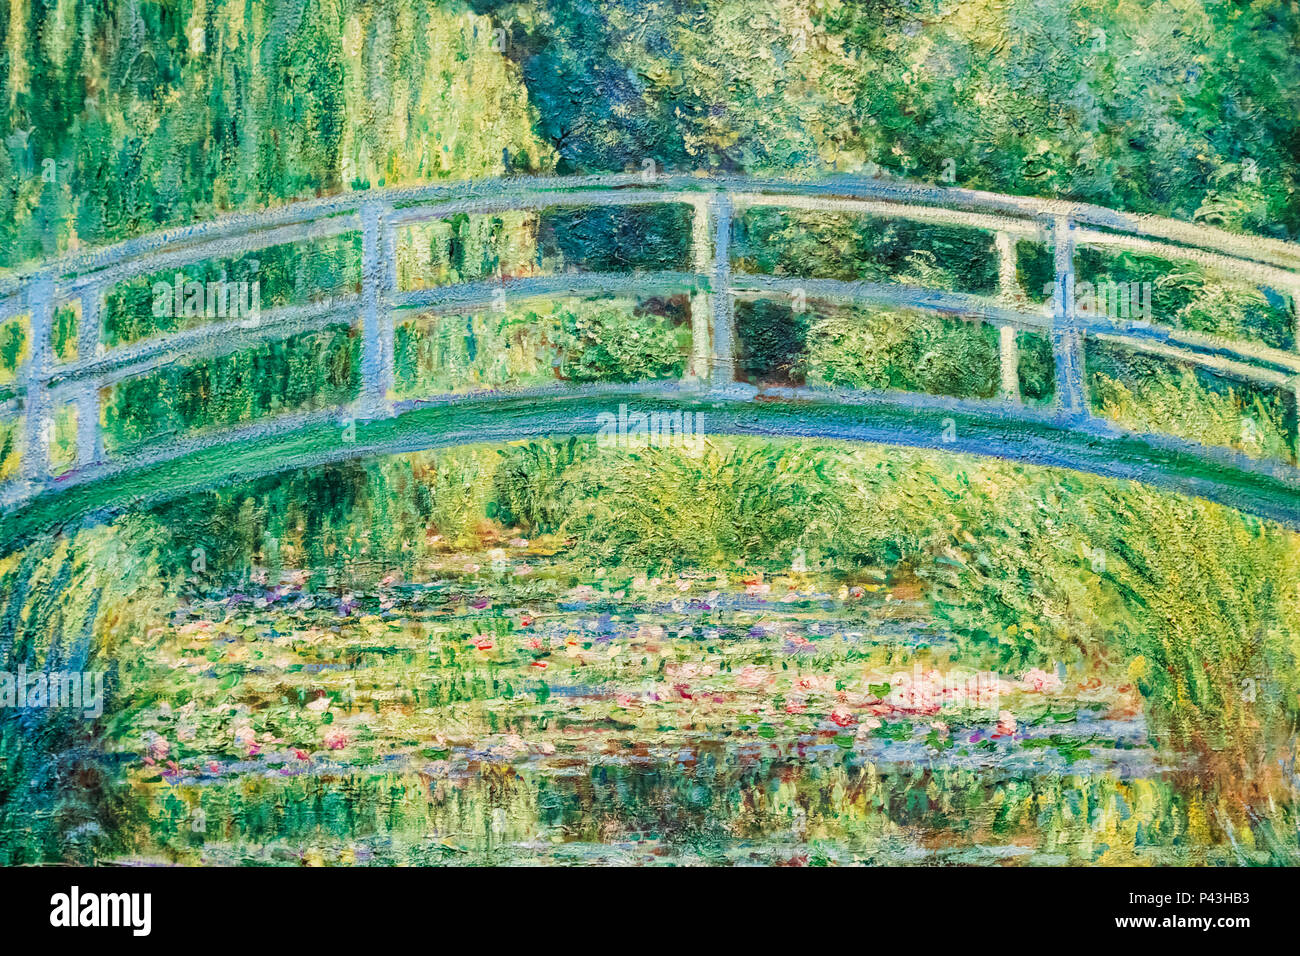 Painting titled 'The Water-Lily Pond' by Claude Monet dated 1899 Stock Photo